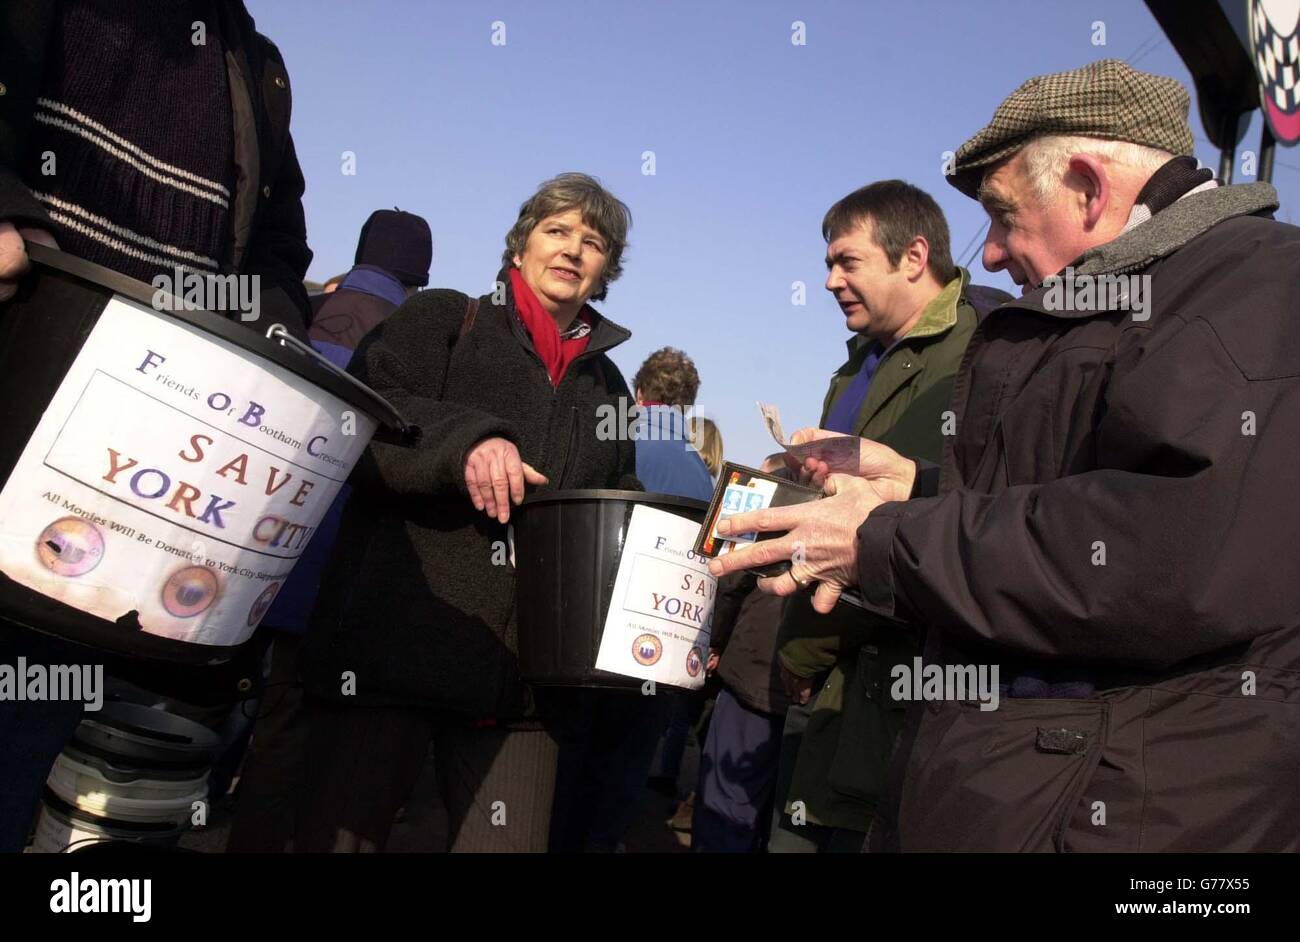 York City supporters collect donations before their Nationwide Division Three match against Bury at Bootham Crescent, York to try and keep their cash-strapped club afloat. Stock Photo